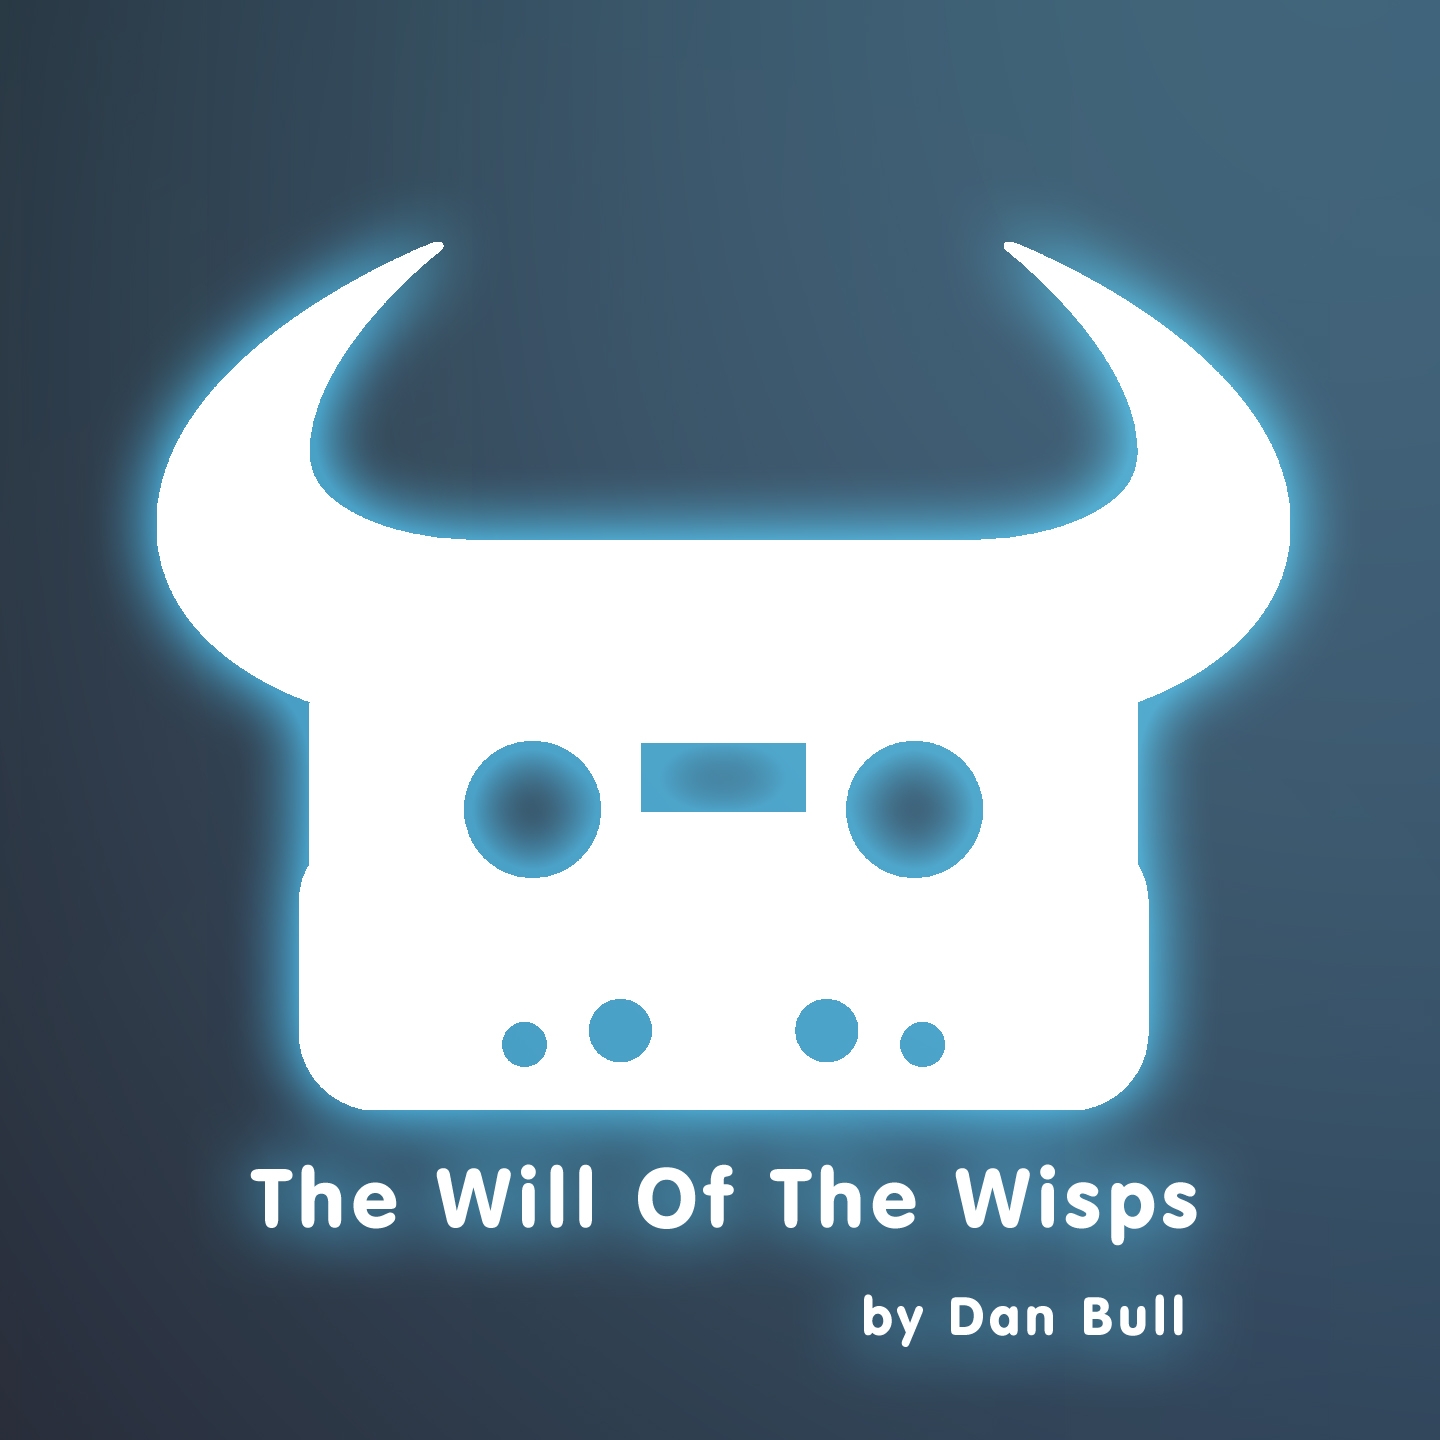 The Will of the Wisps